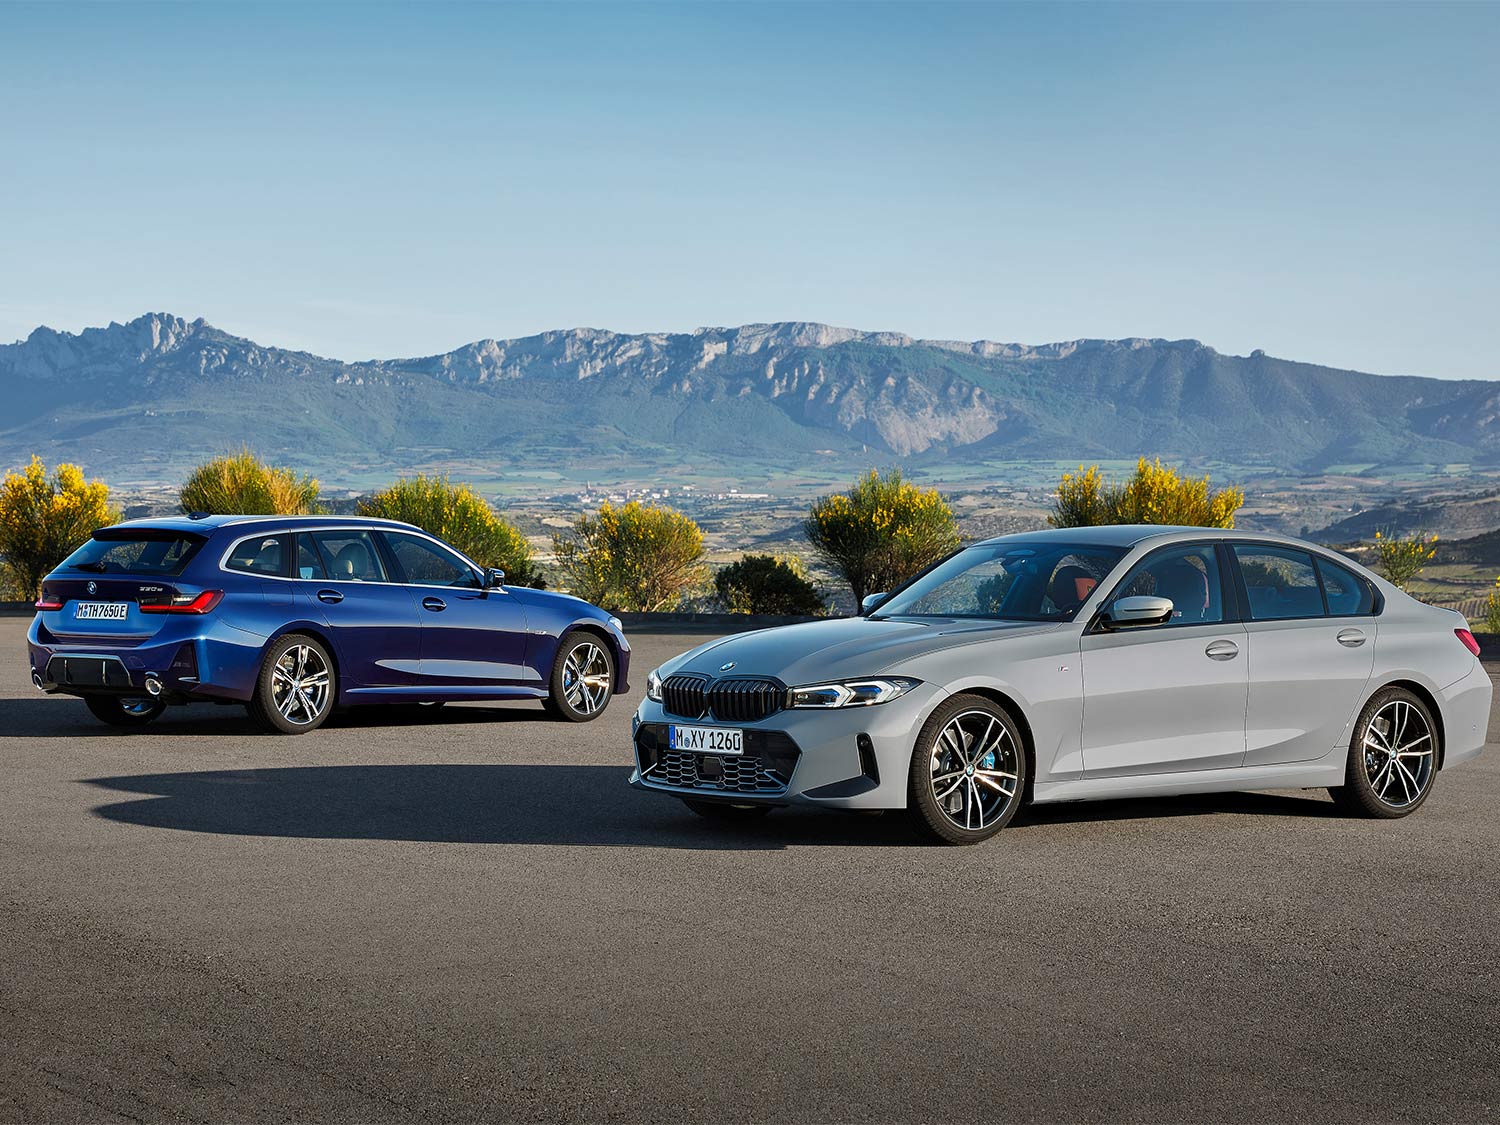 NEW EDITION OF THE BMW 3 SERIES